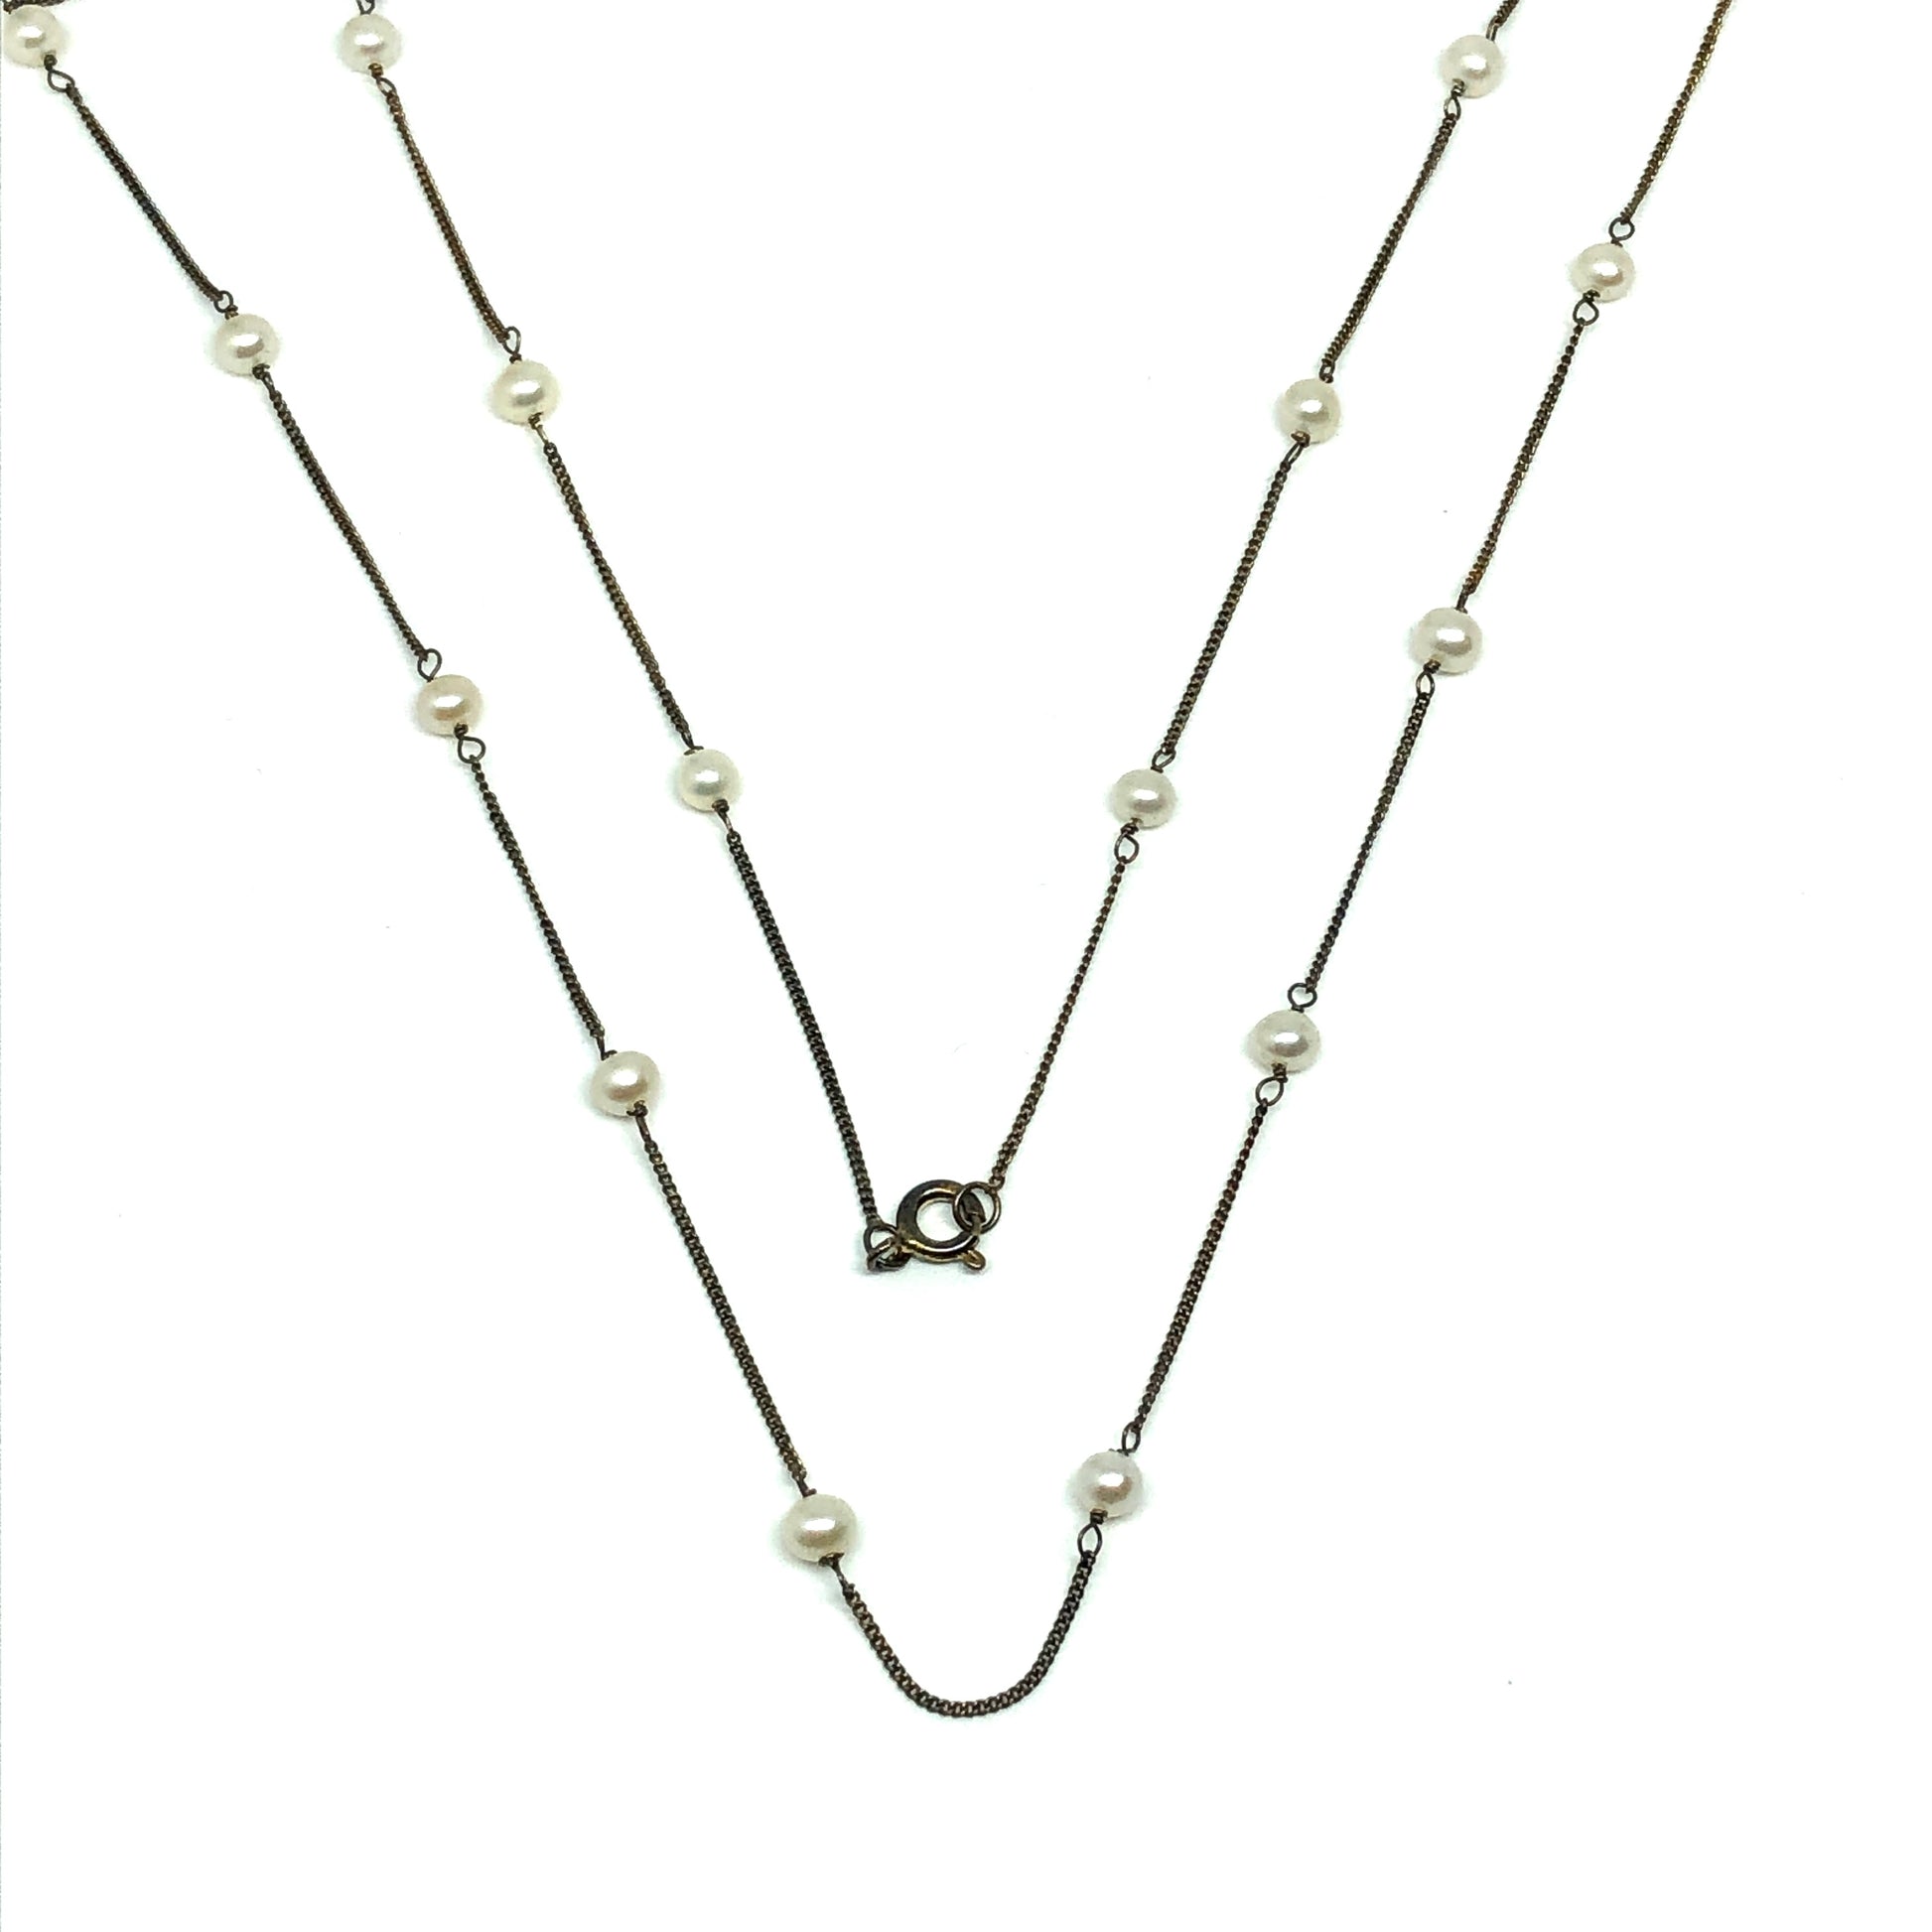 32" Oxidized Antiqued Gold Sterling Silver Rustic Pearl Station Necklace